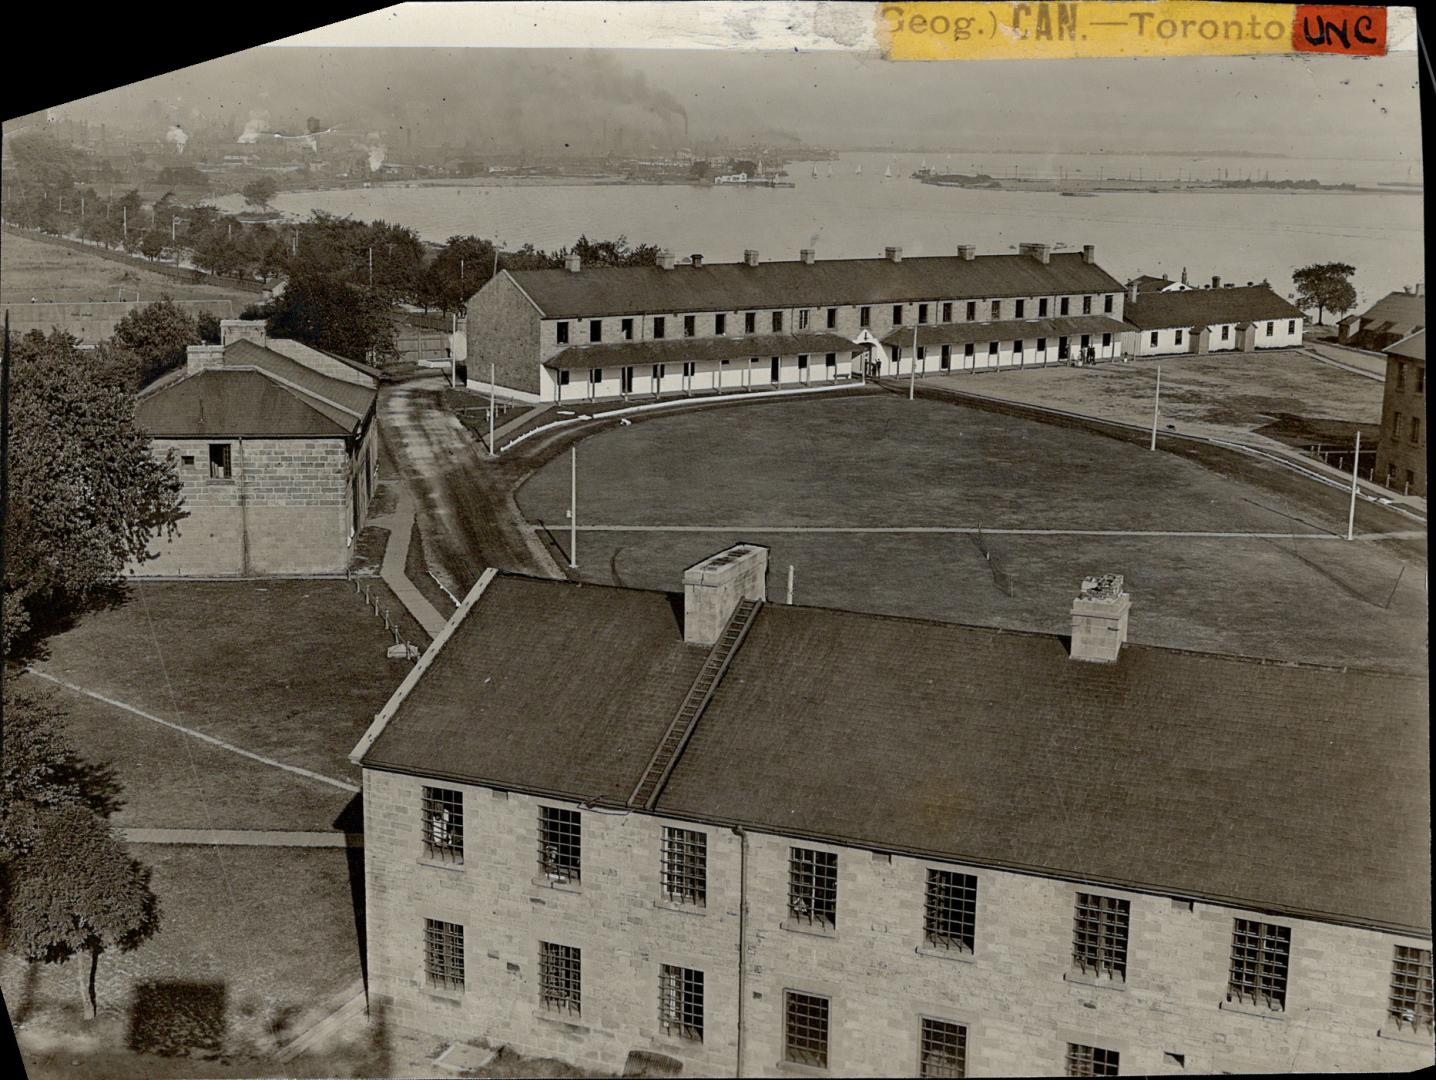 General Views of new fort - Toronto Bay - Island in the distance